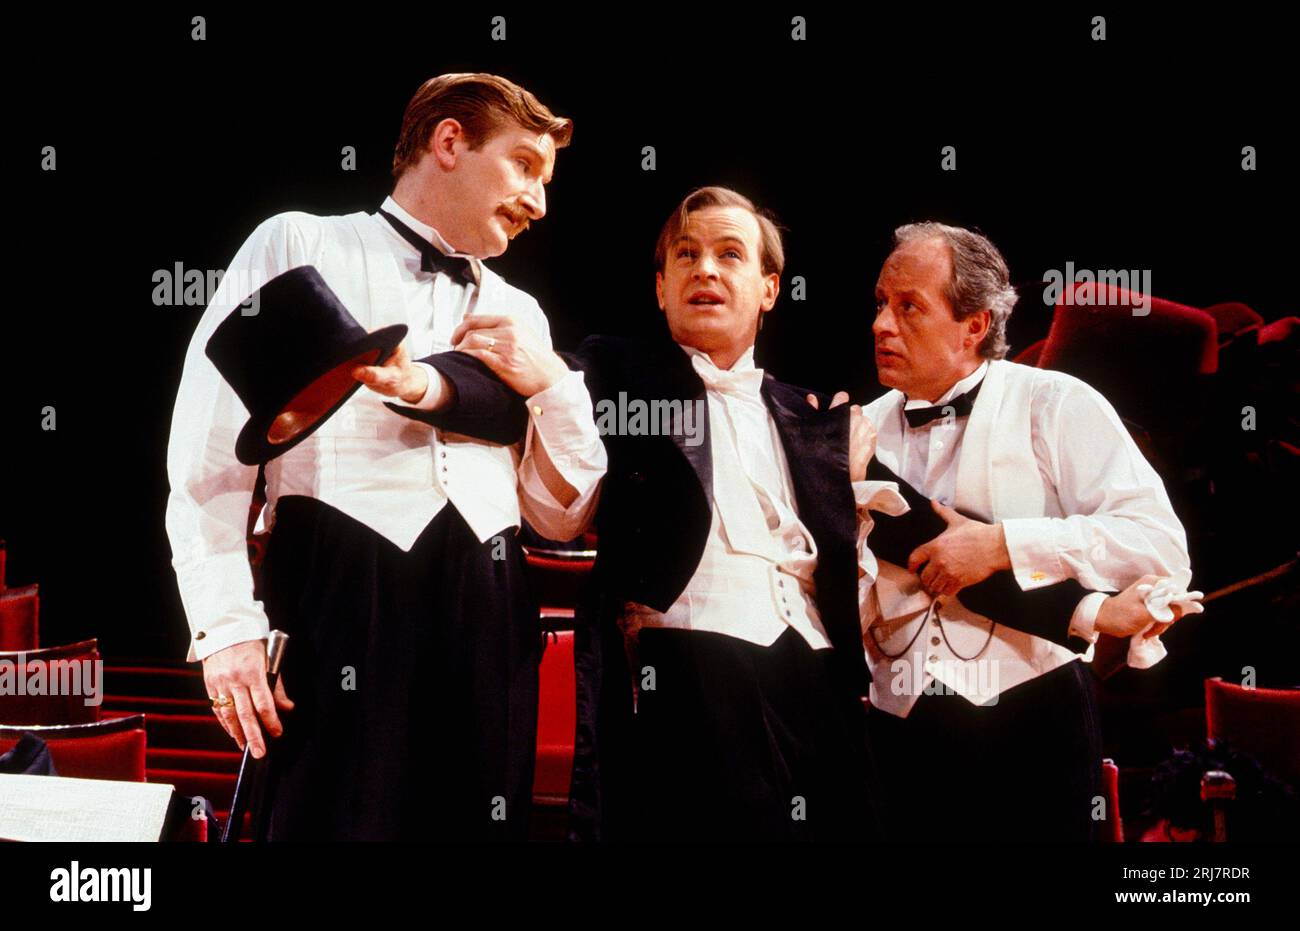 l-r: Malcolm Storry (Ricordi), Ian Charleson (Boito), David Lyon (Faccio) in AFTER AIDA by Julian Mitchell at The Old Vic, London SE1  19/03/1986  a Welsh National Opera production  musical director: Martin Andre  design: Bob Crowley  lighting: Jeff Beecroft  director: Howard Davies Stock Photo